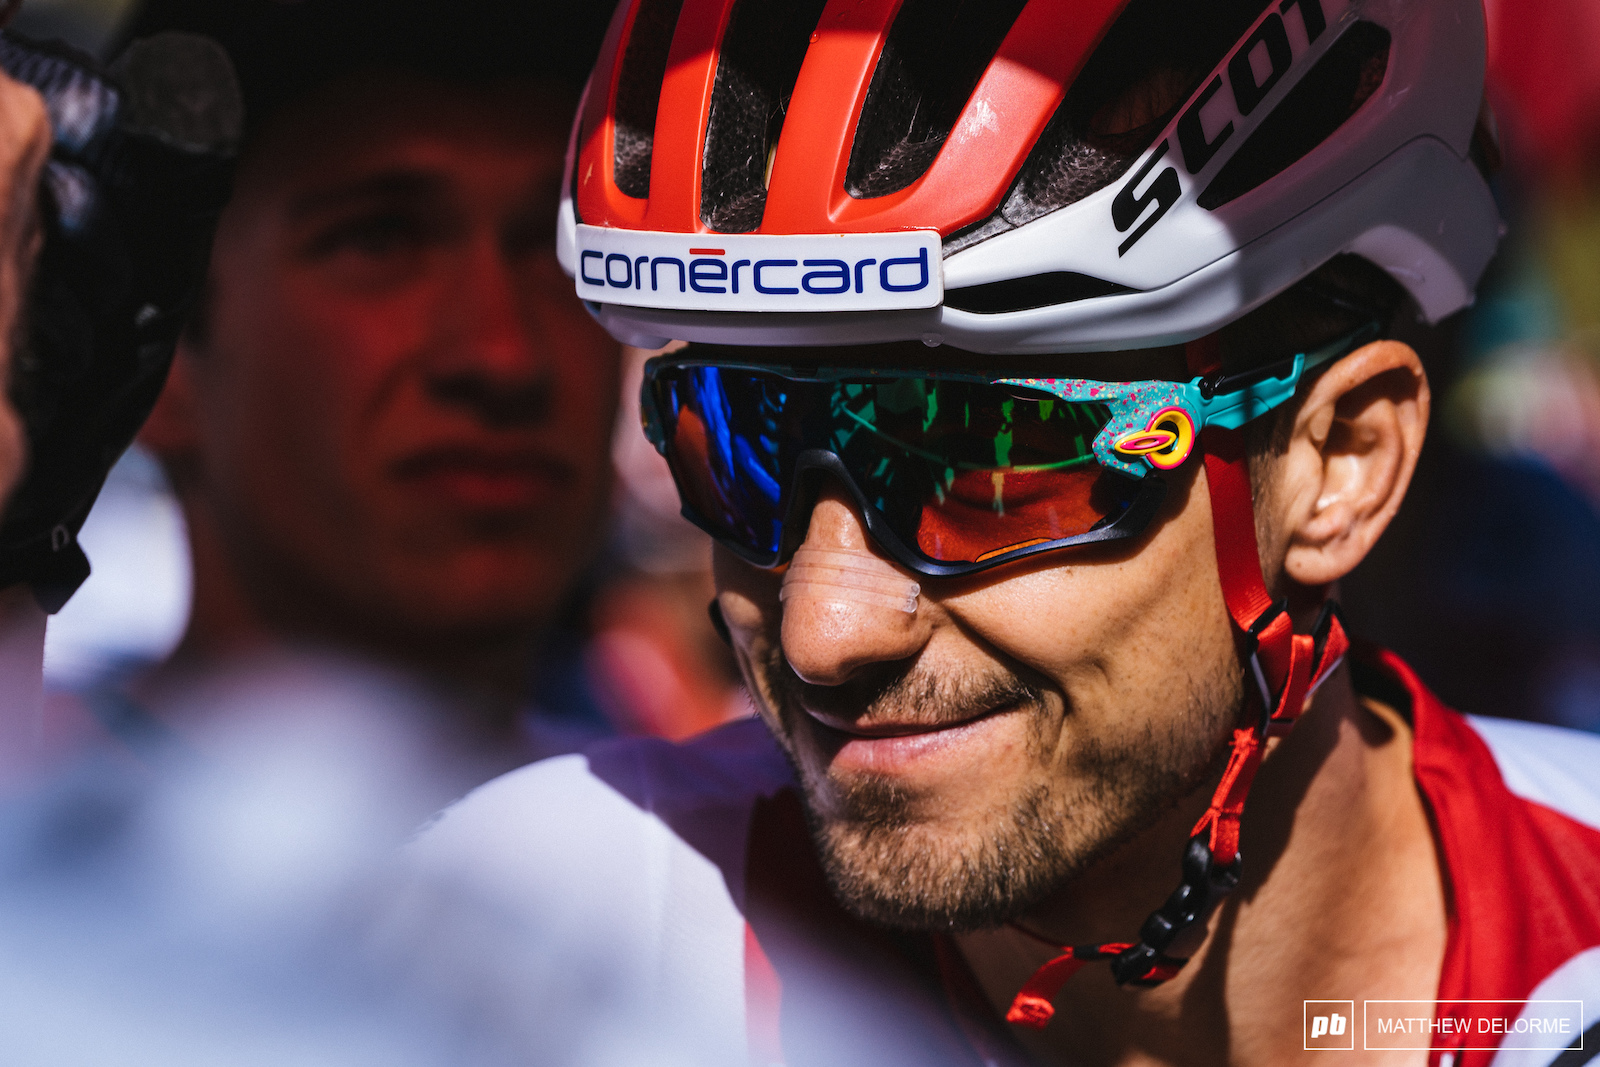 The confident smile of Nino Schurter. It says it all.